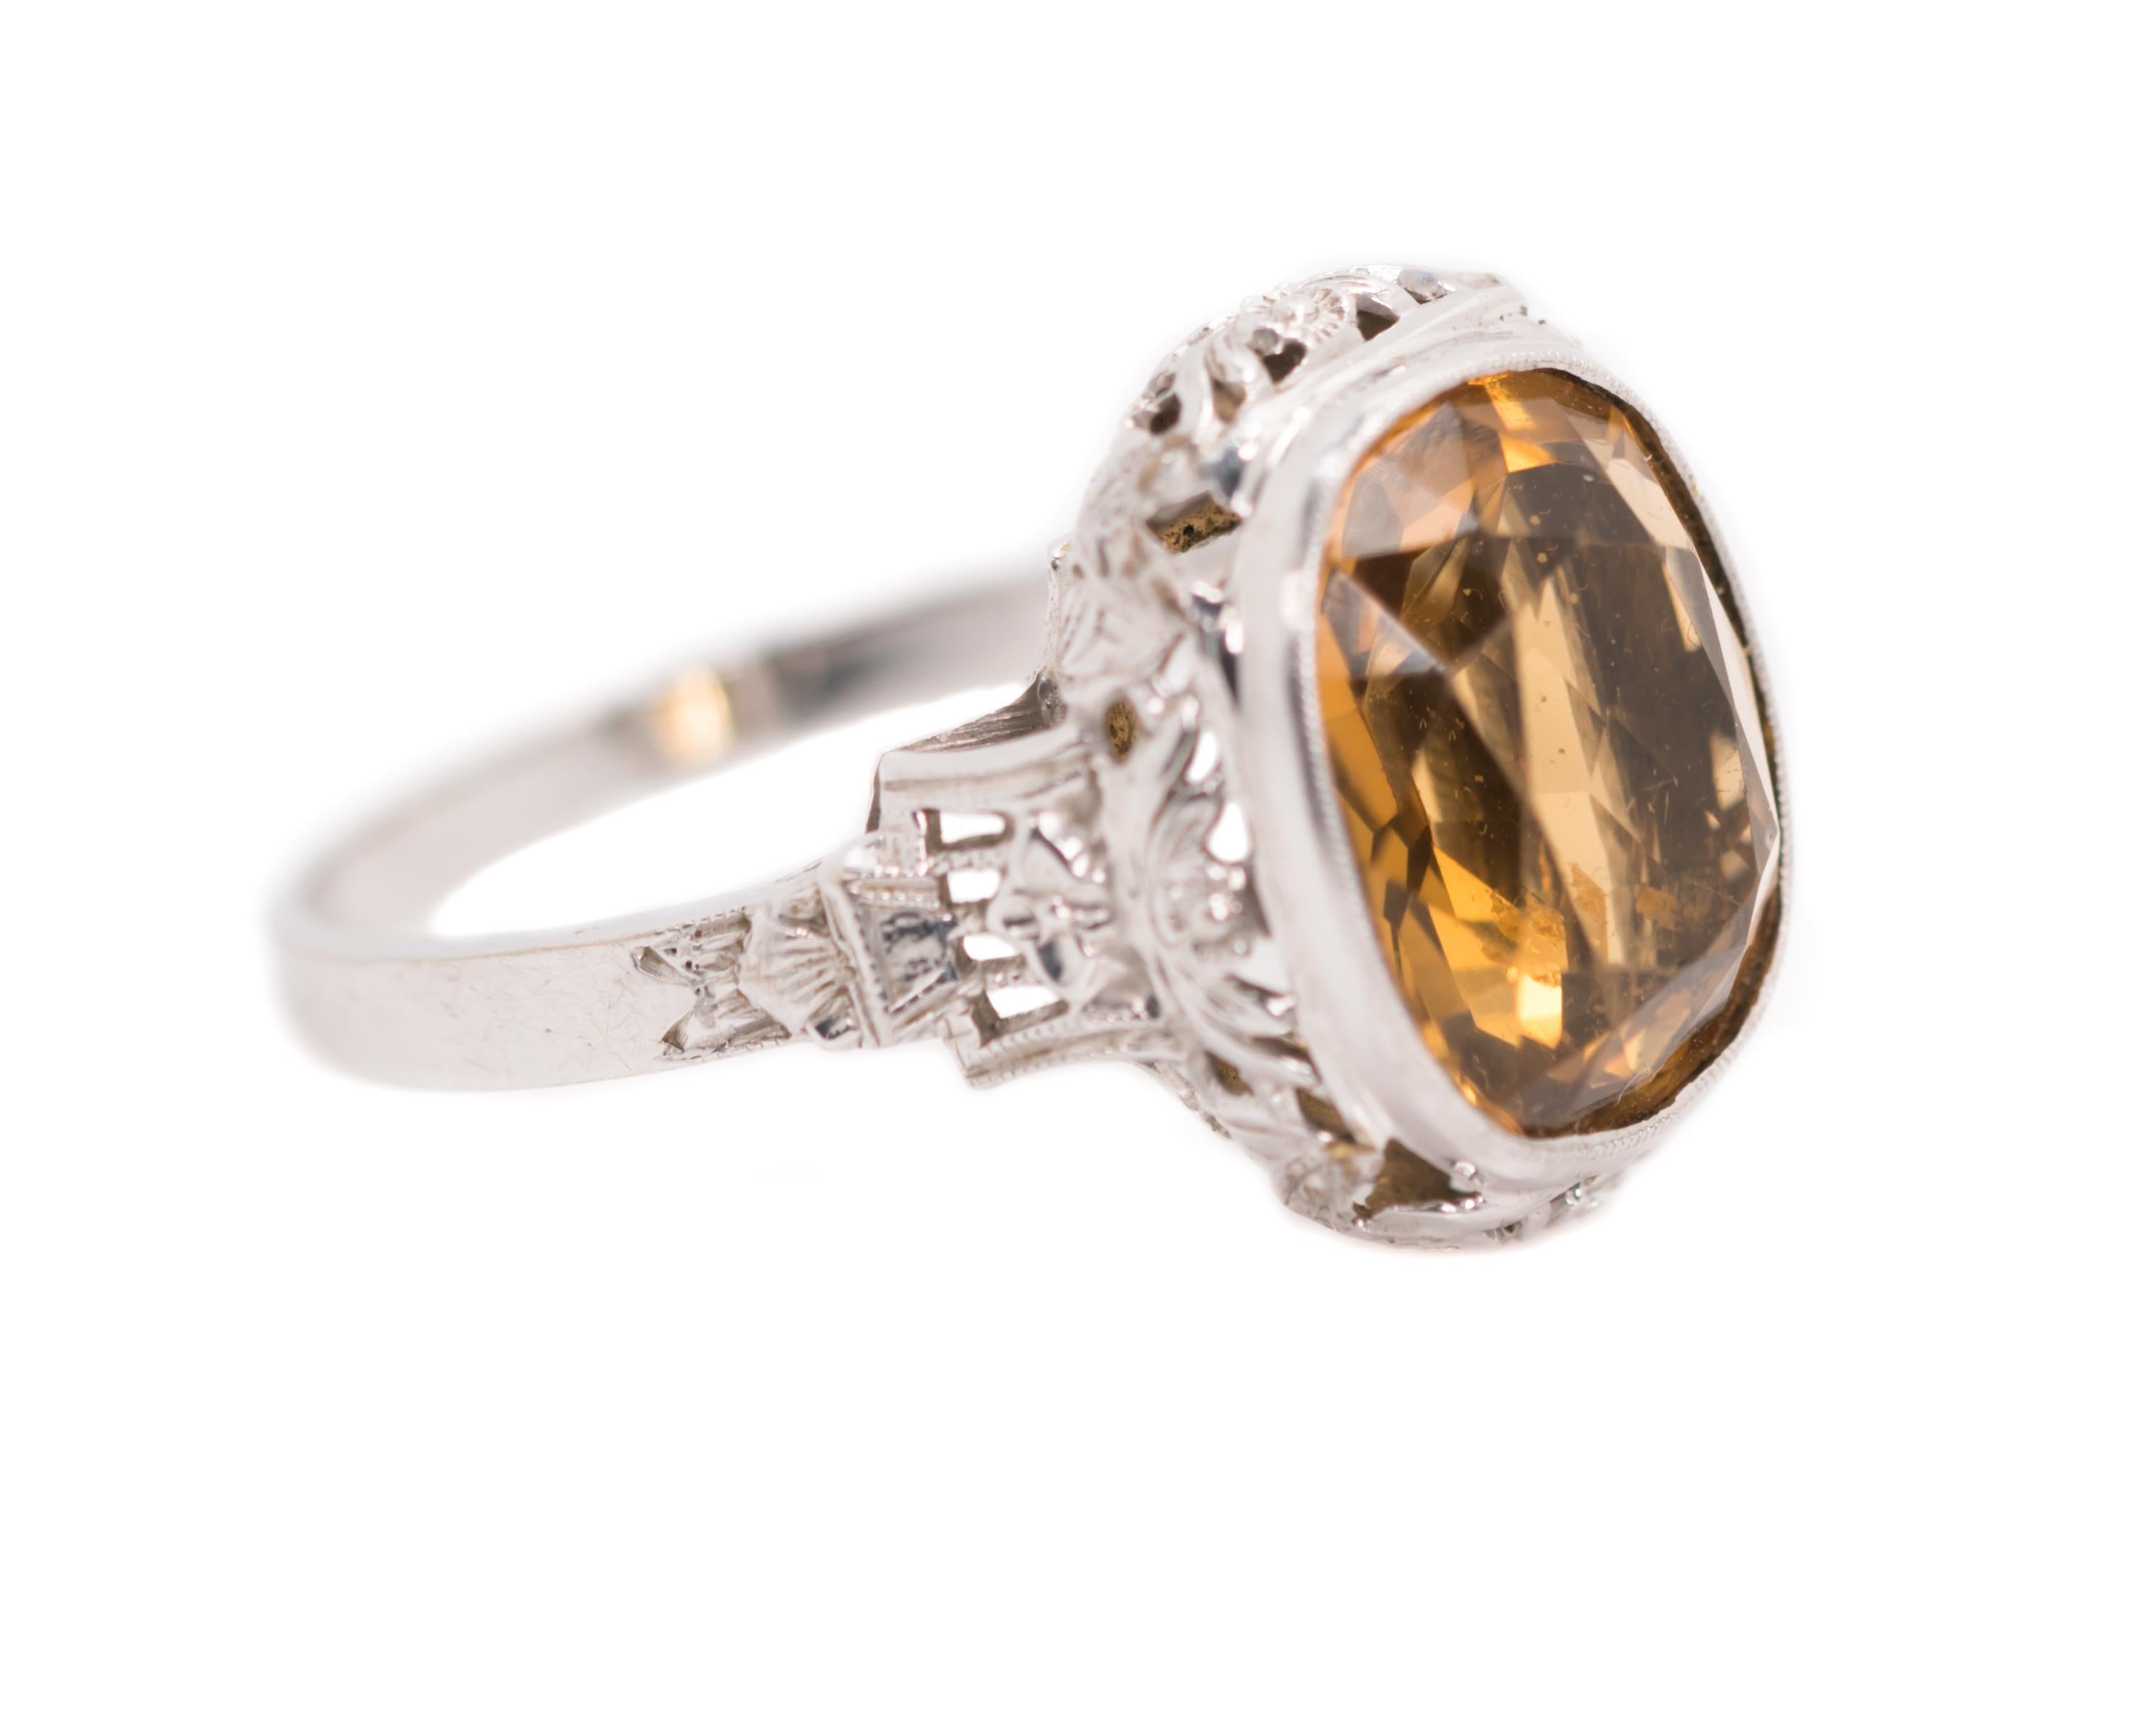 Art Nouveau 5.0 Carat Citrine Ring - 14K White Gold, Citrine

Features:
5.0 Carat, Old European, Antique Cushion cut Citrine
14 Karat White Gold Filigree Setting
Cathedral Setting with Open Shoulders and Gallery
Citrine is Bezel set with a fine